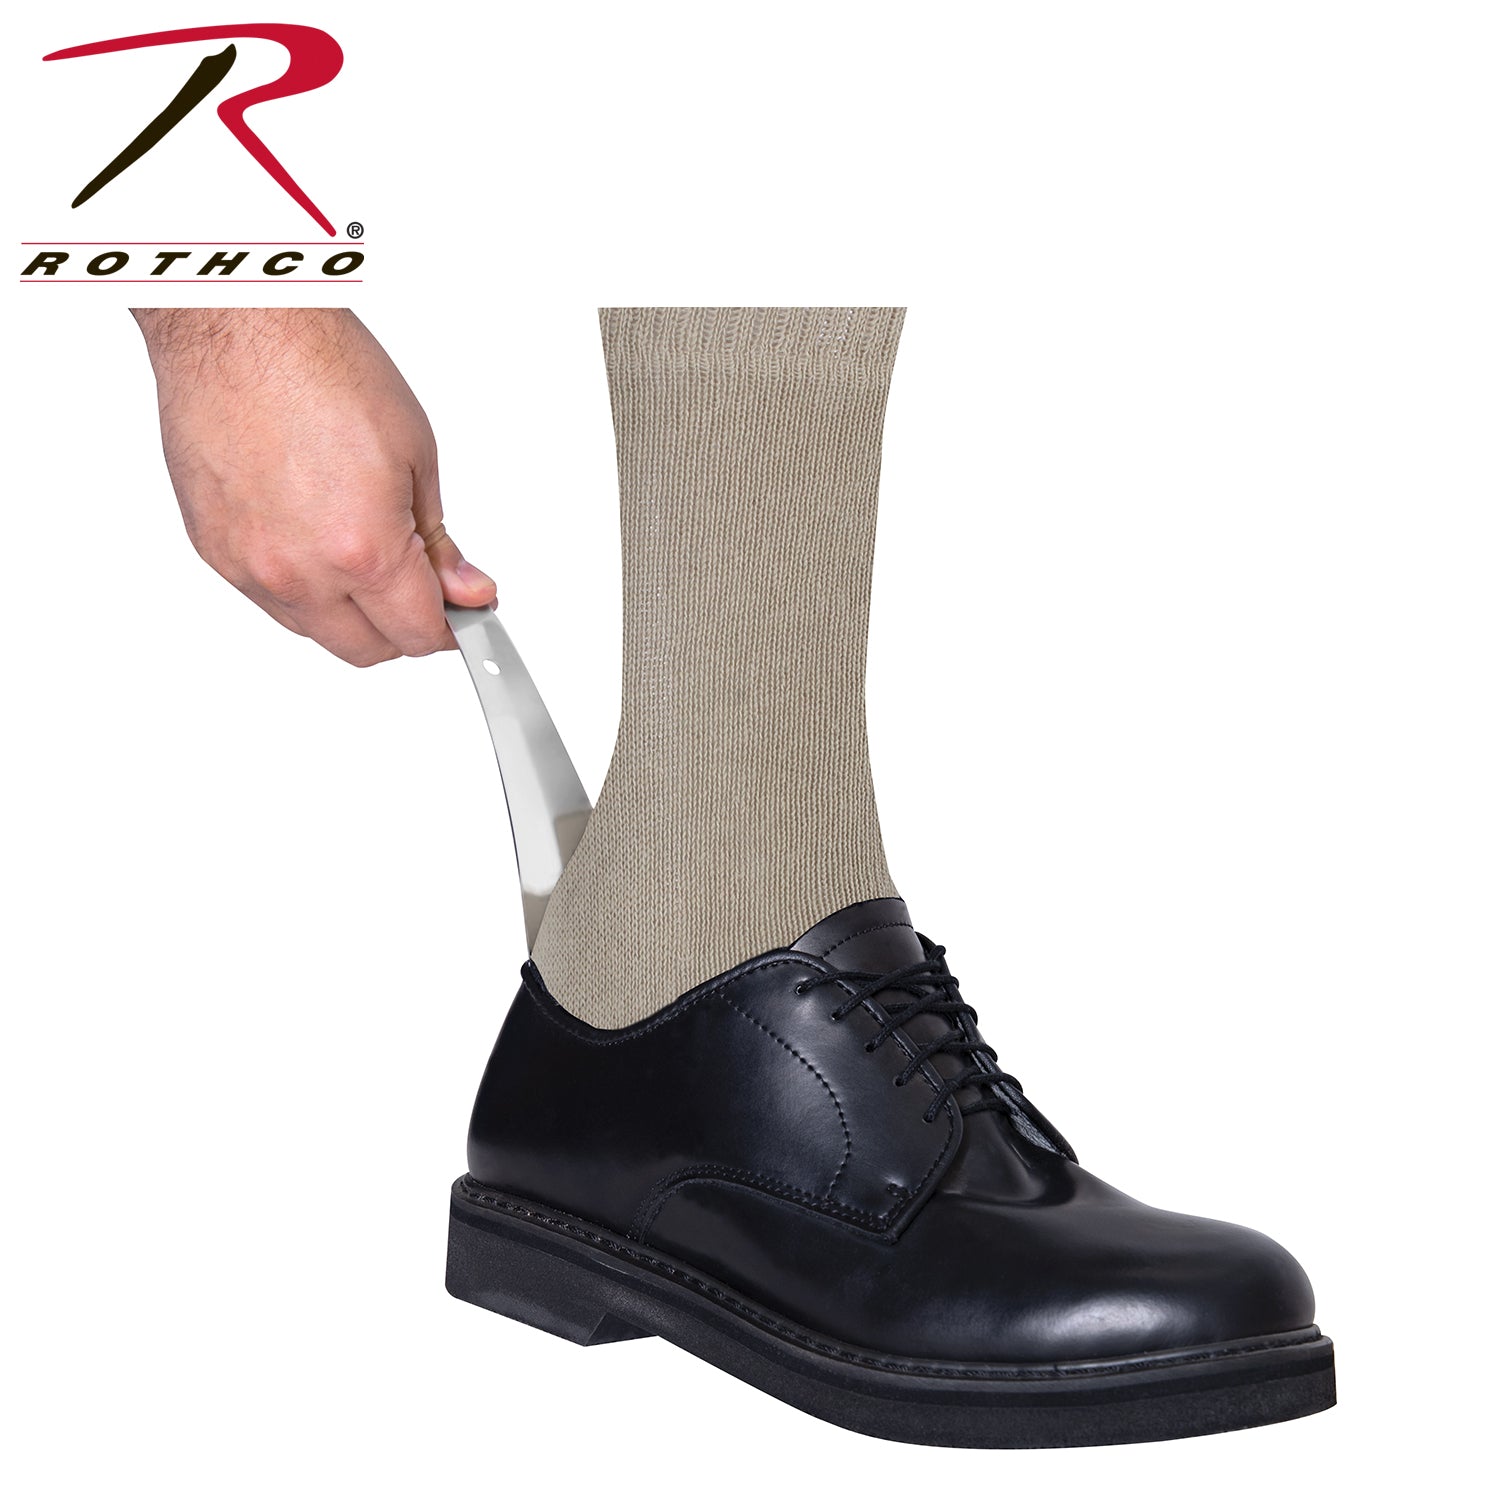 Rothco 6 Inch Stainless Steel Shoe Horn - Tactical Choice Plus